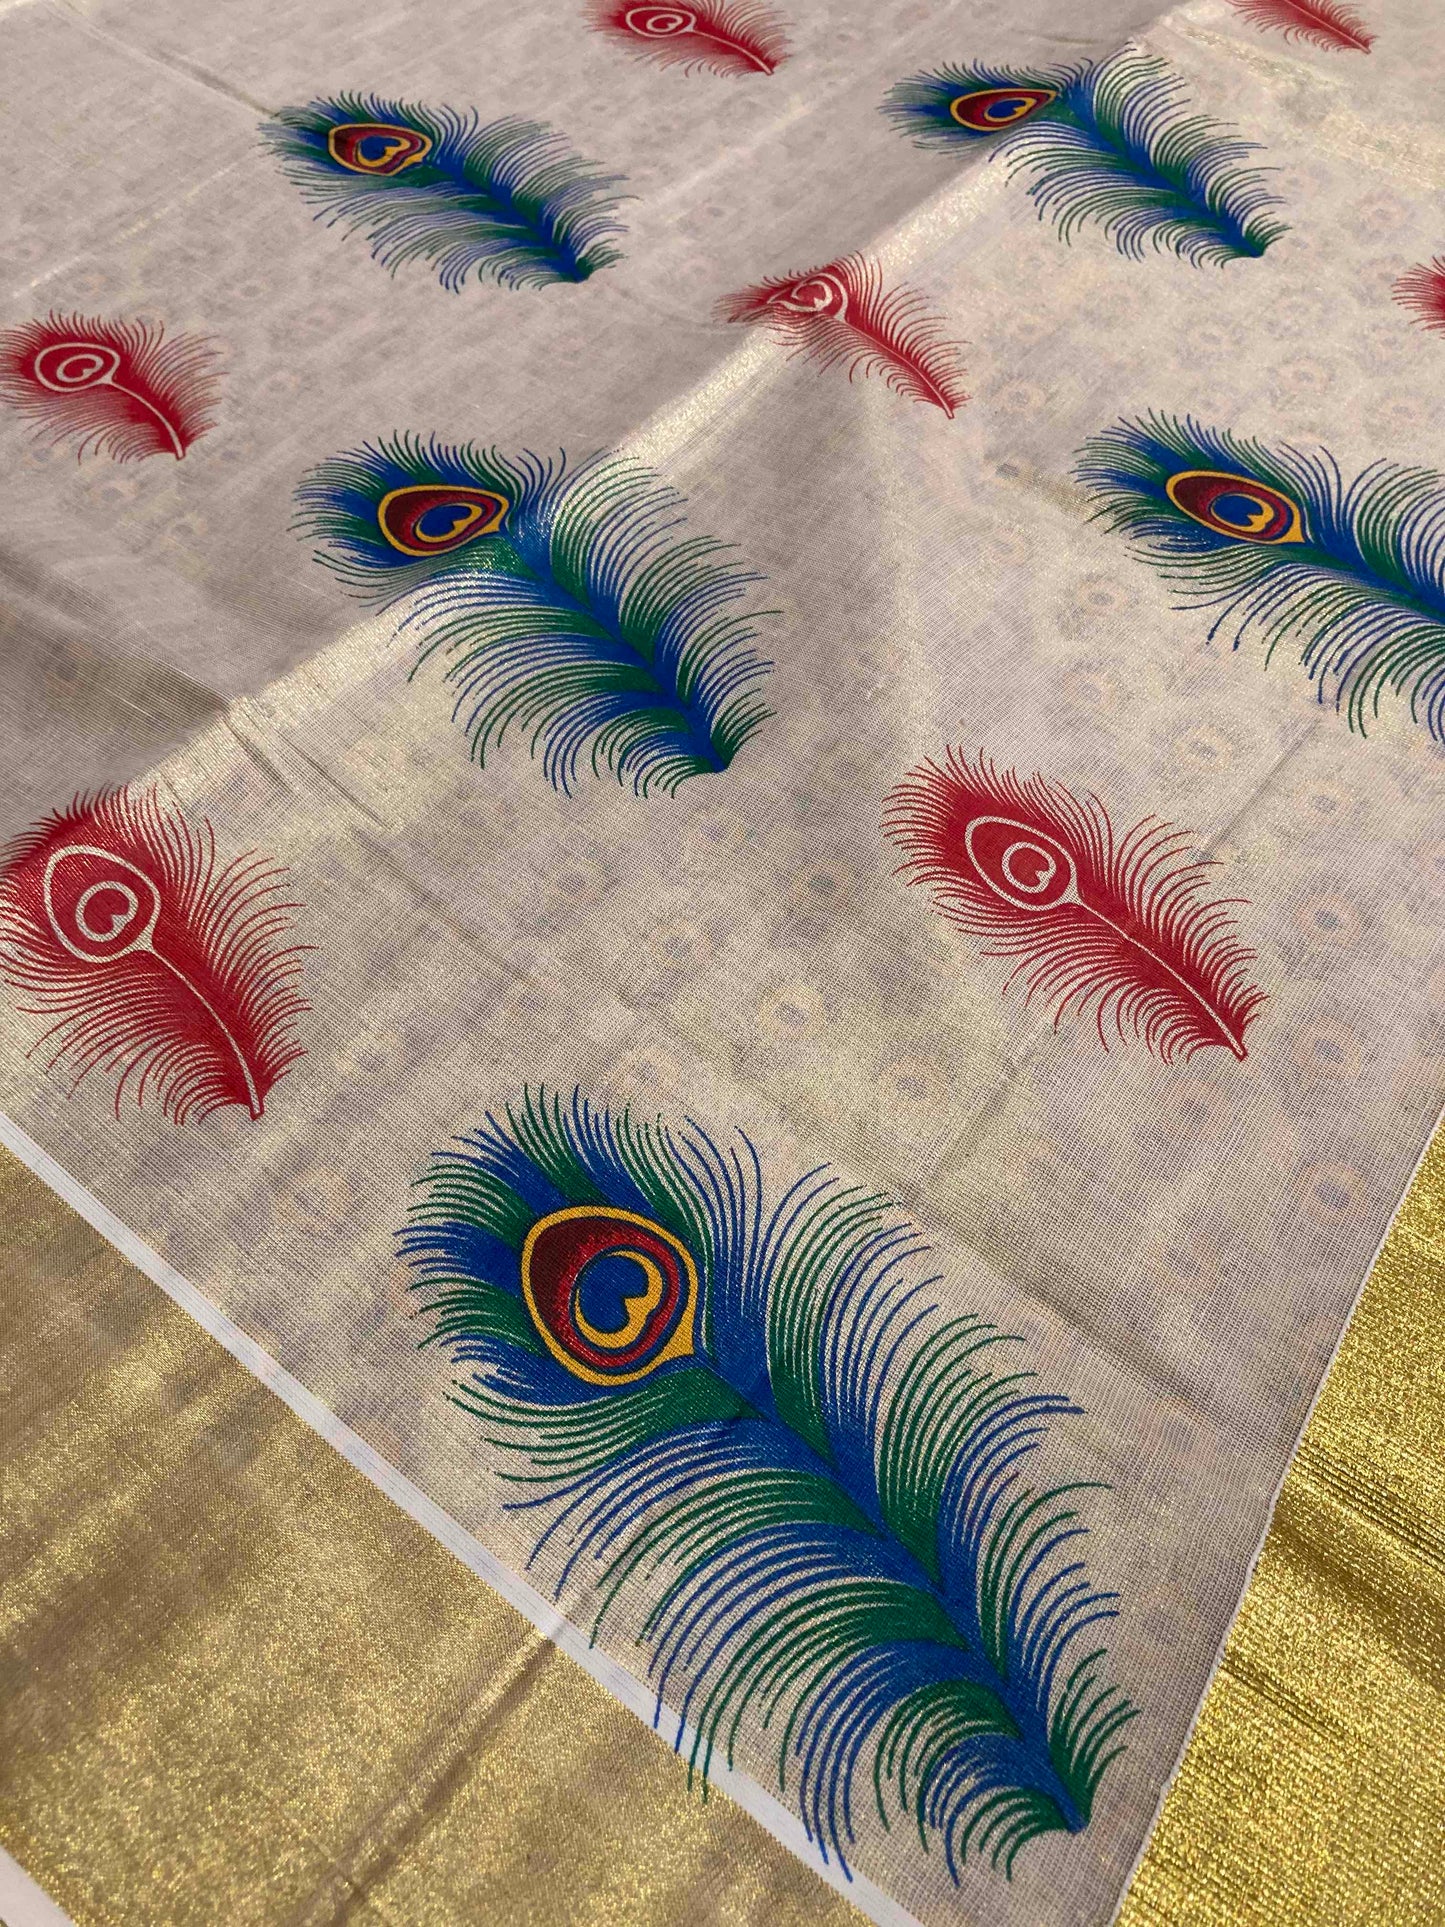 Kerala Tissue Kasavu Saree With Mural Peacock Feather Design (with Printed Design Blouse)